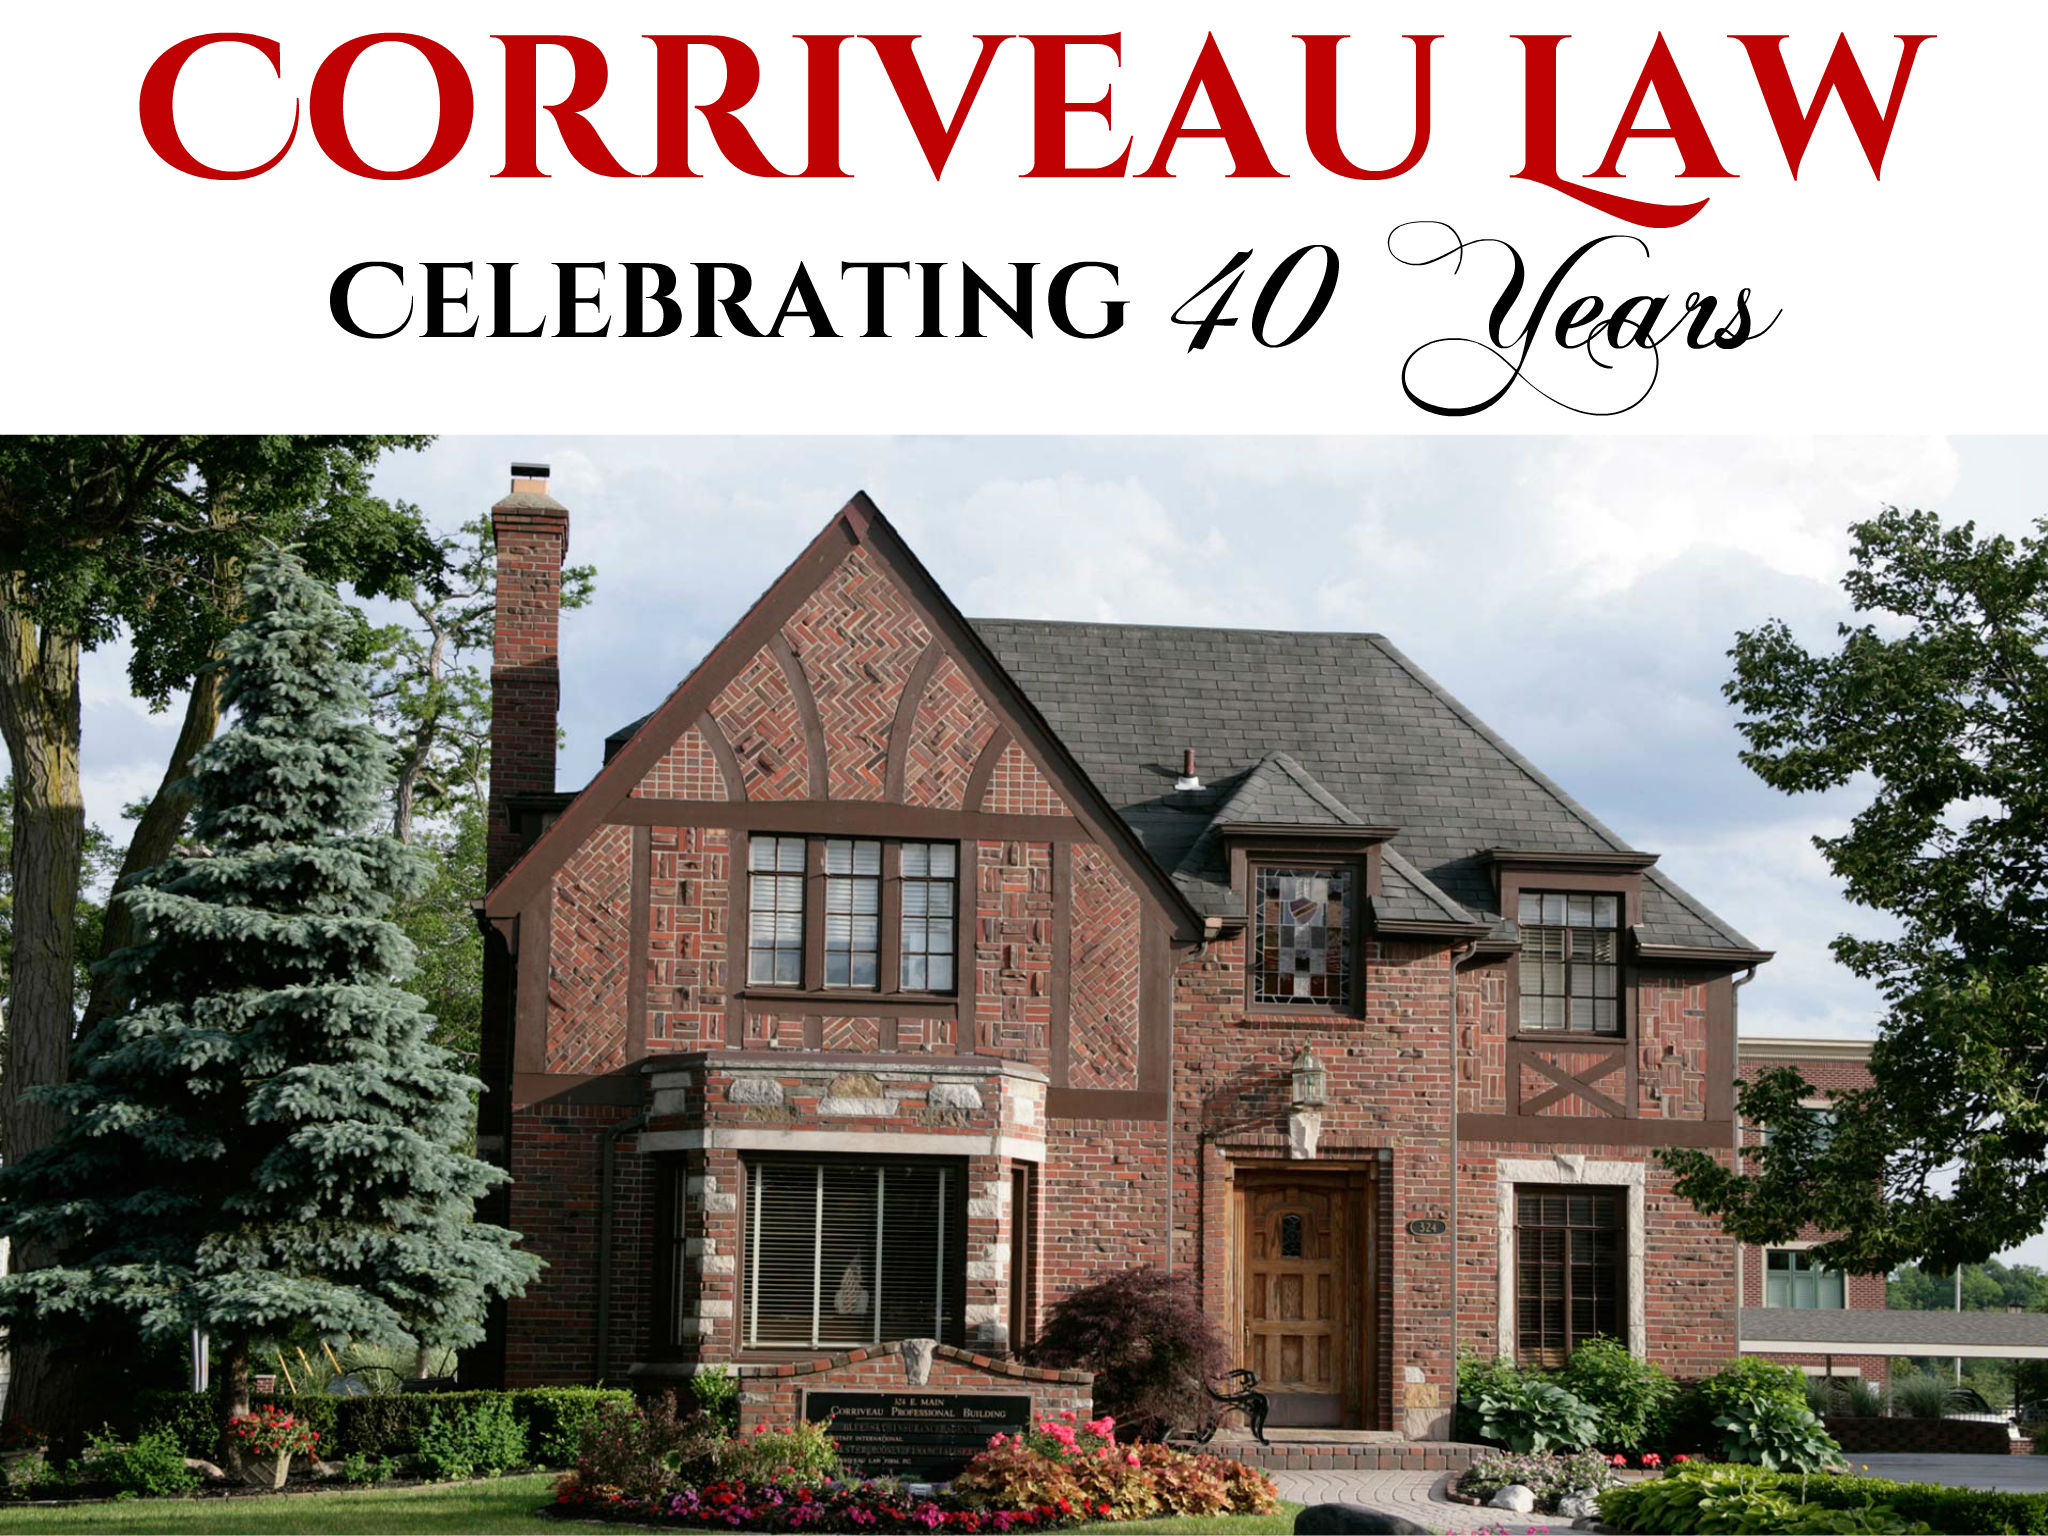 This year, 2016 marks Corriveau Law’s 40th Anniversary! We would like to say a very special “thank-you” to our clients, staff, and all who have made these last 40 years golden. 